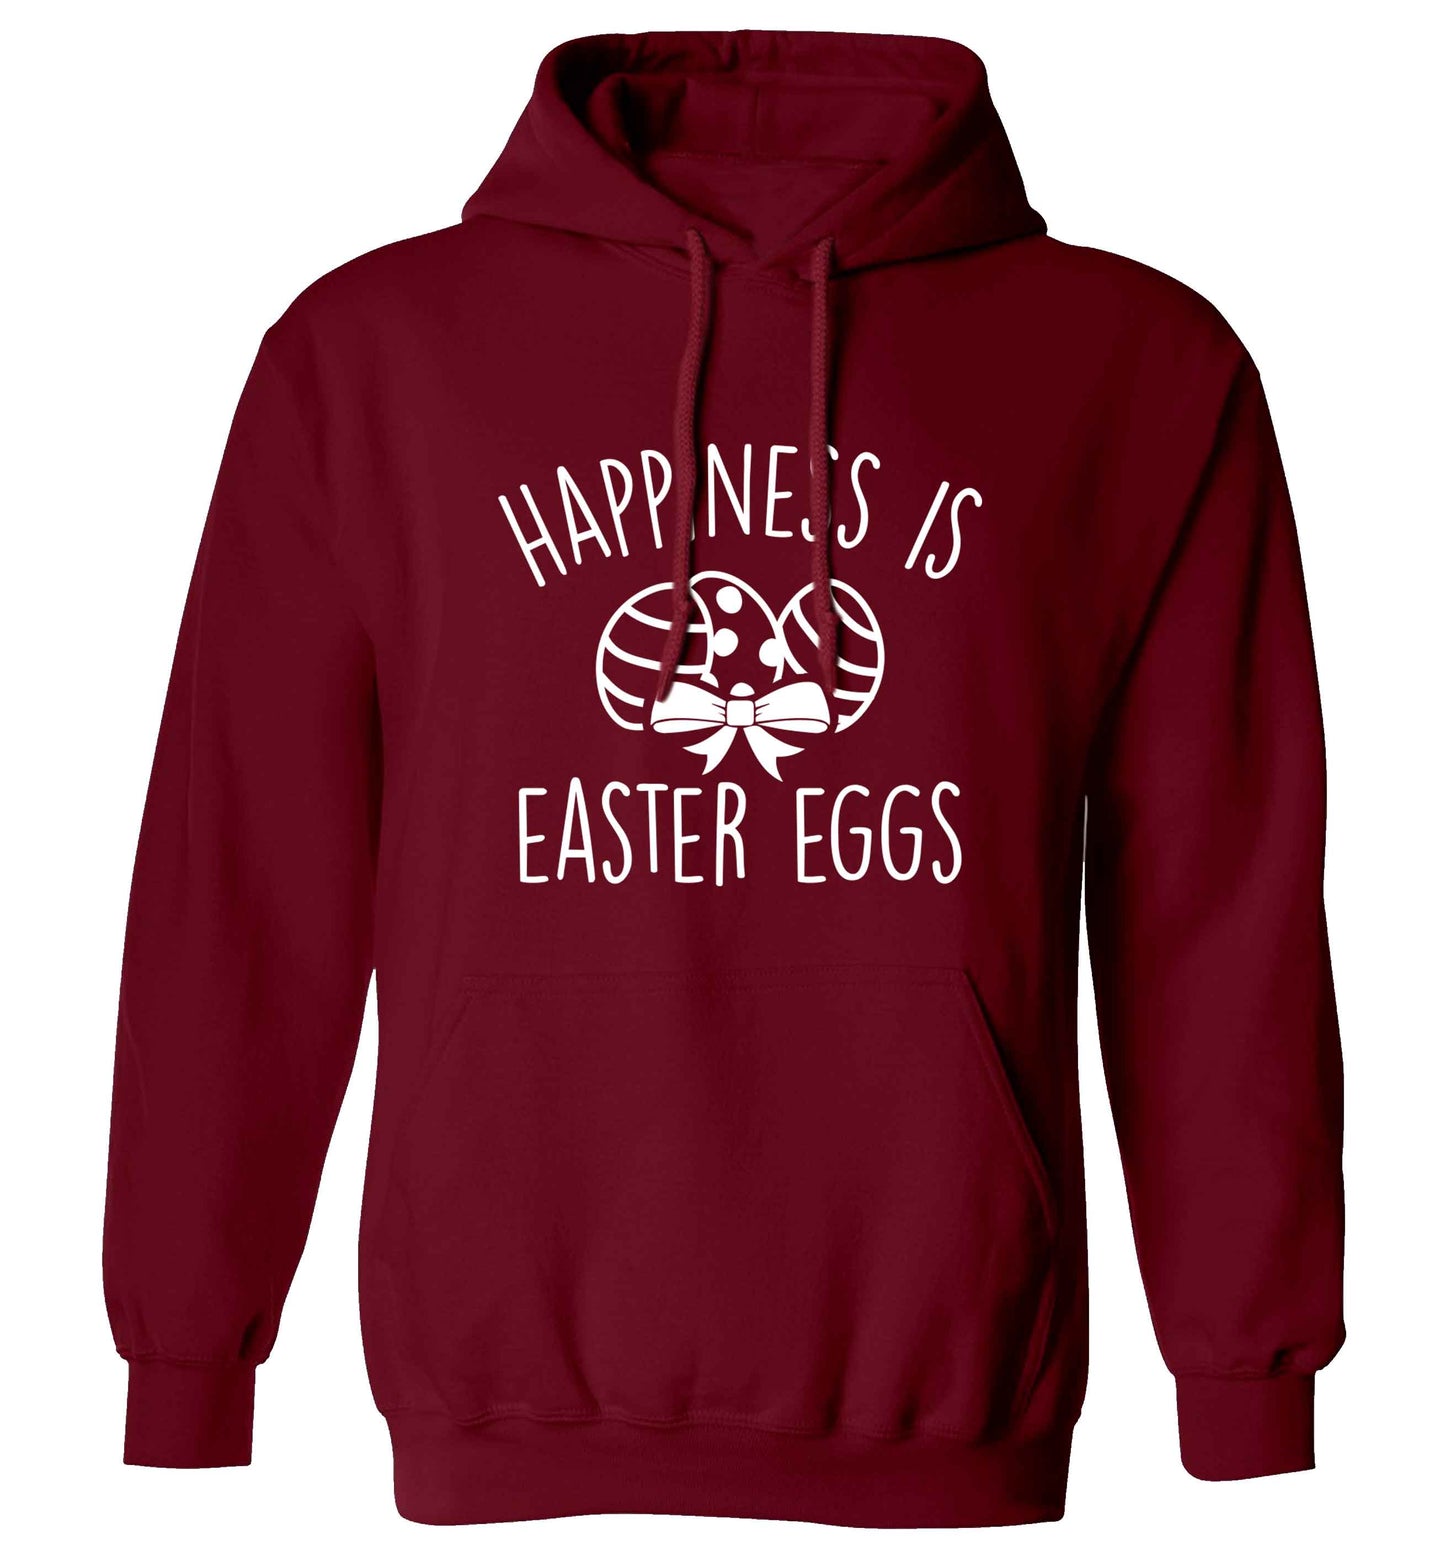 Happiness is Easter eggs adults unisex maroon hoodie 2XL